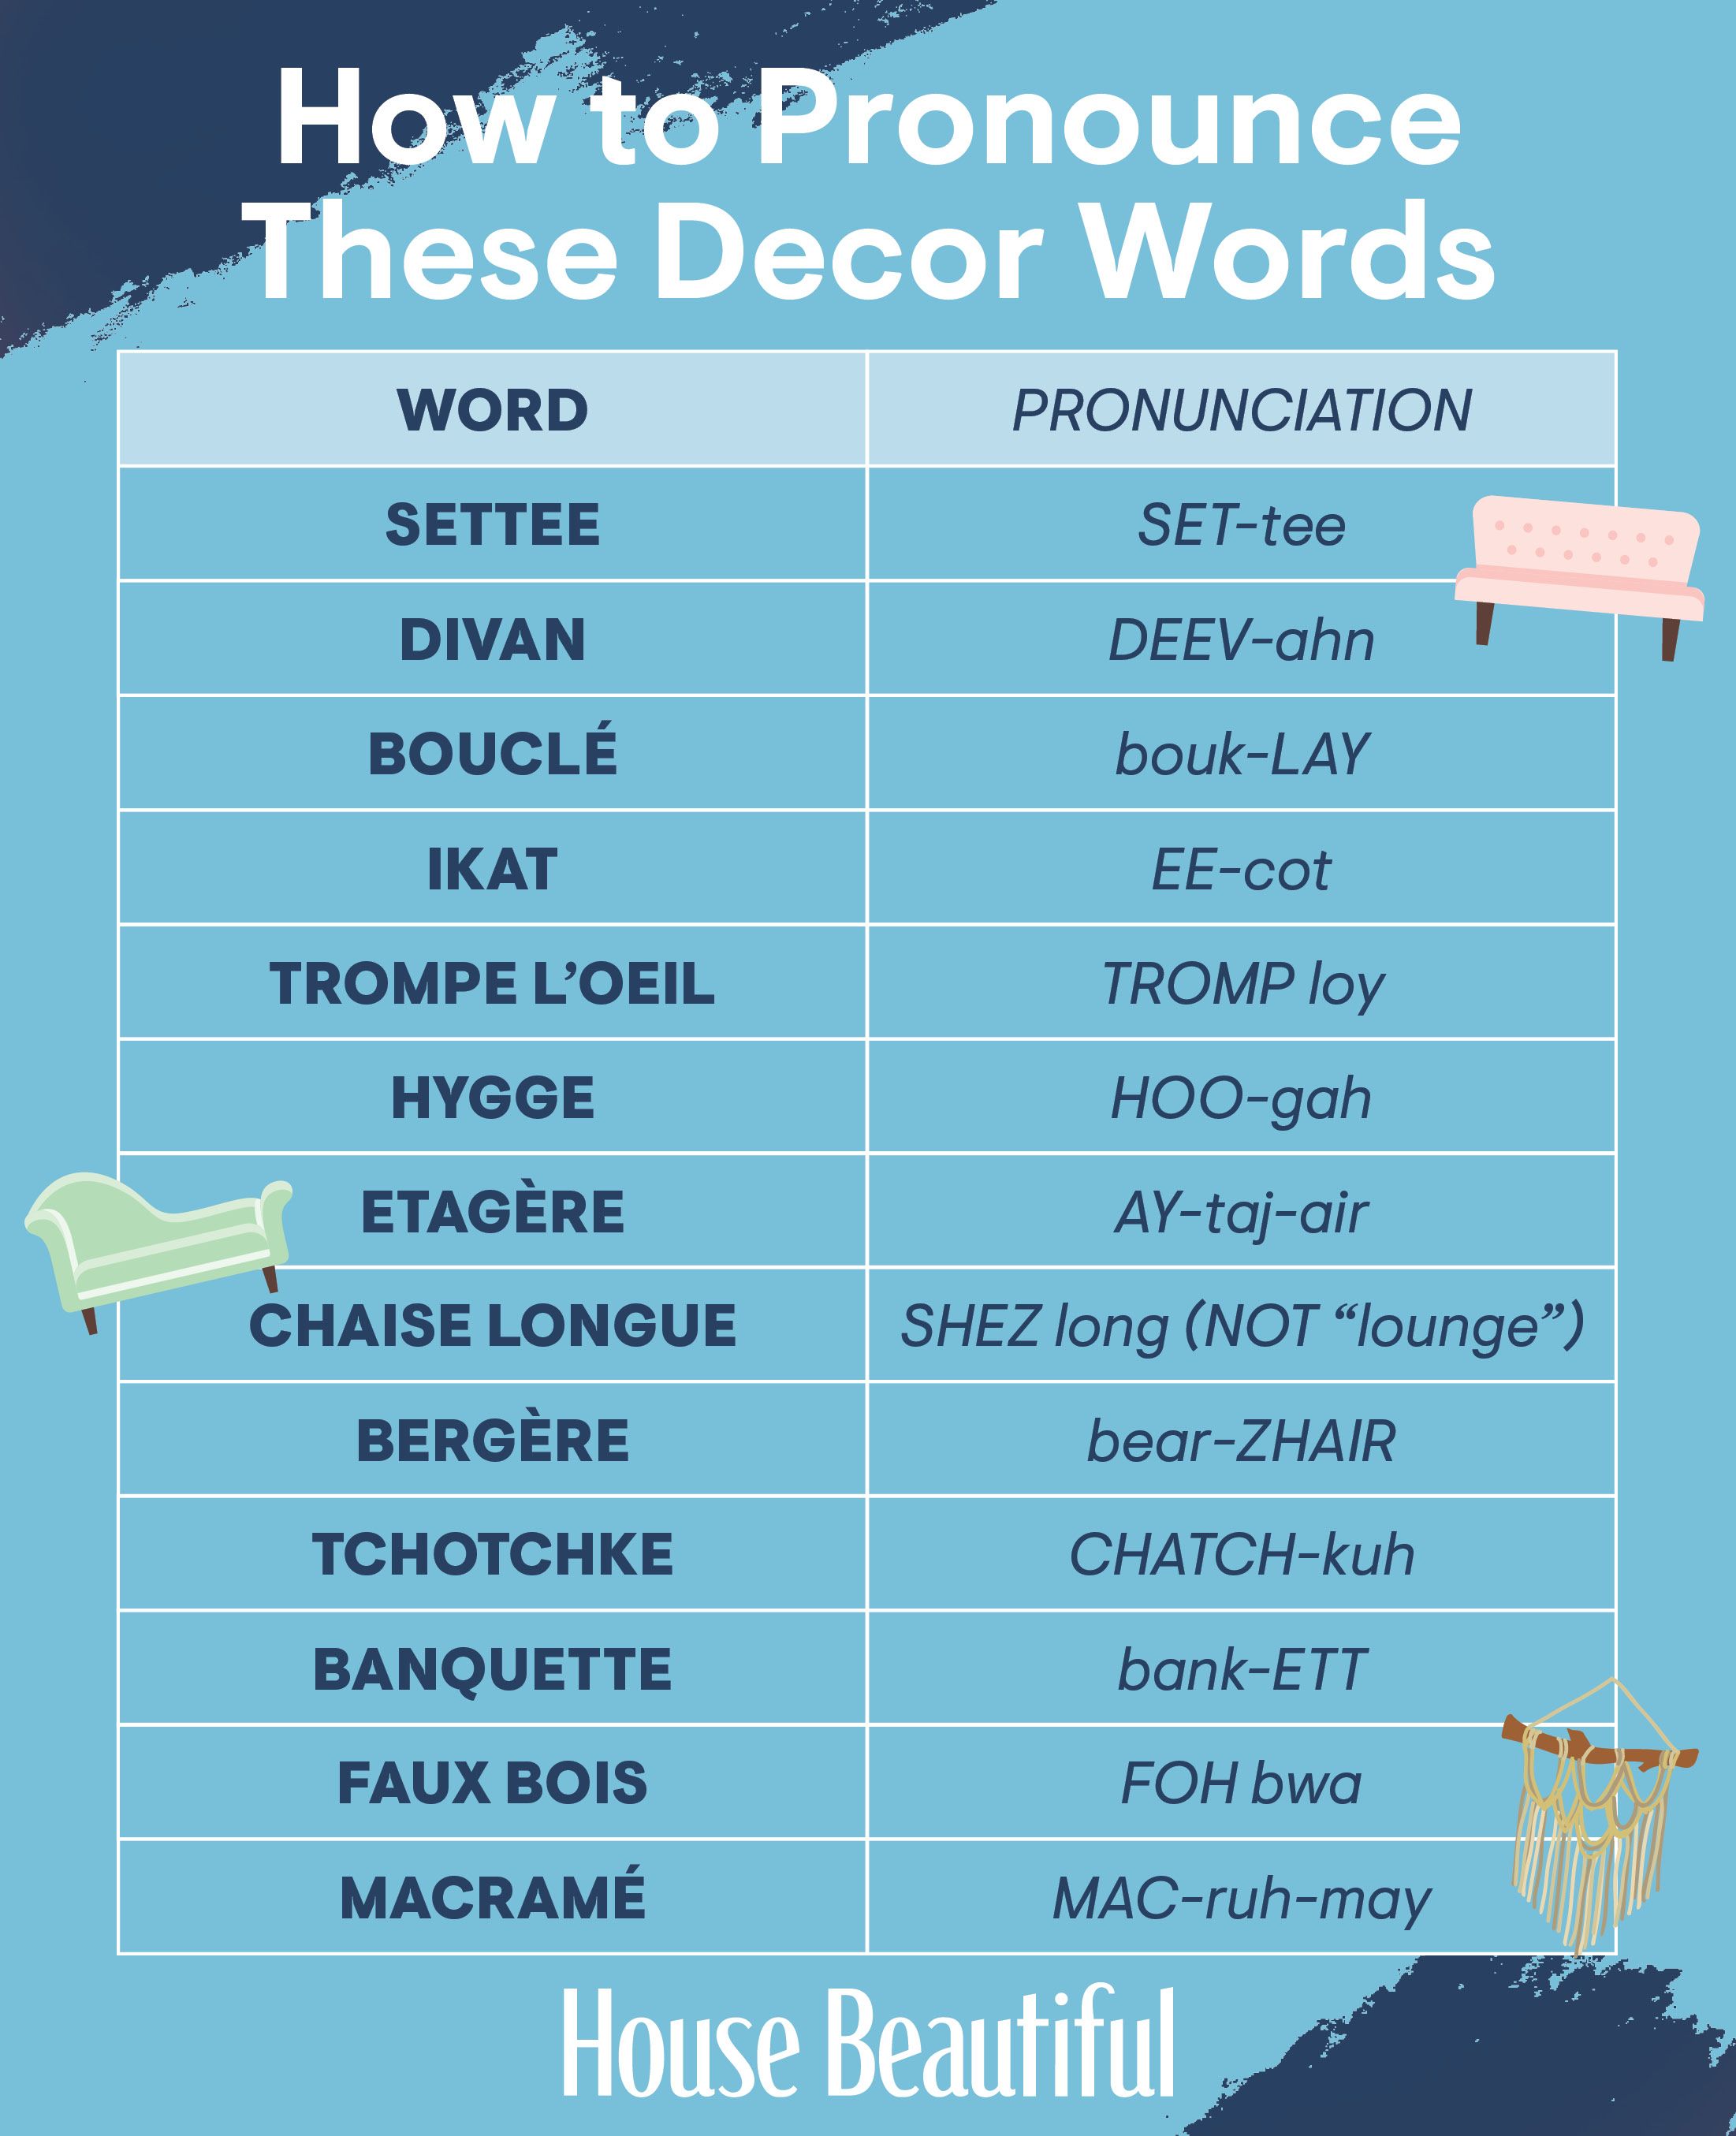 The Right Way to Pronounce Hygge, Etagère, and More Design Words